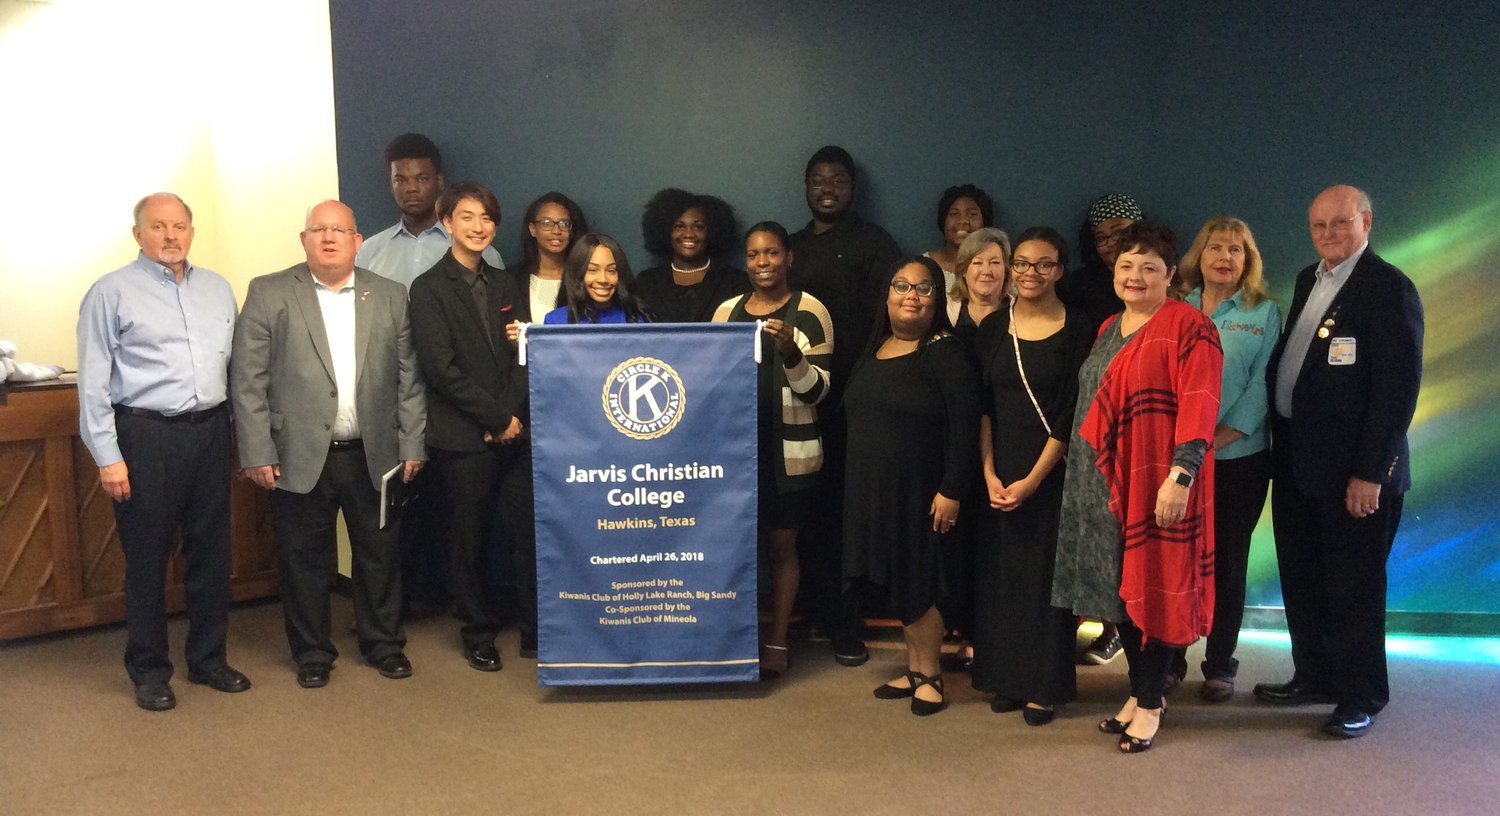 Mineola and Holly Lake Kiwanis Clubs were honored by Jarvis Christian College for their work supporting the Circle K International Club on the Jarvis campus.